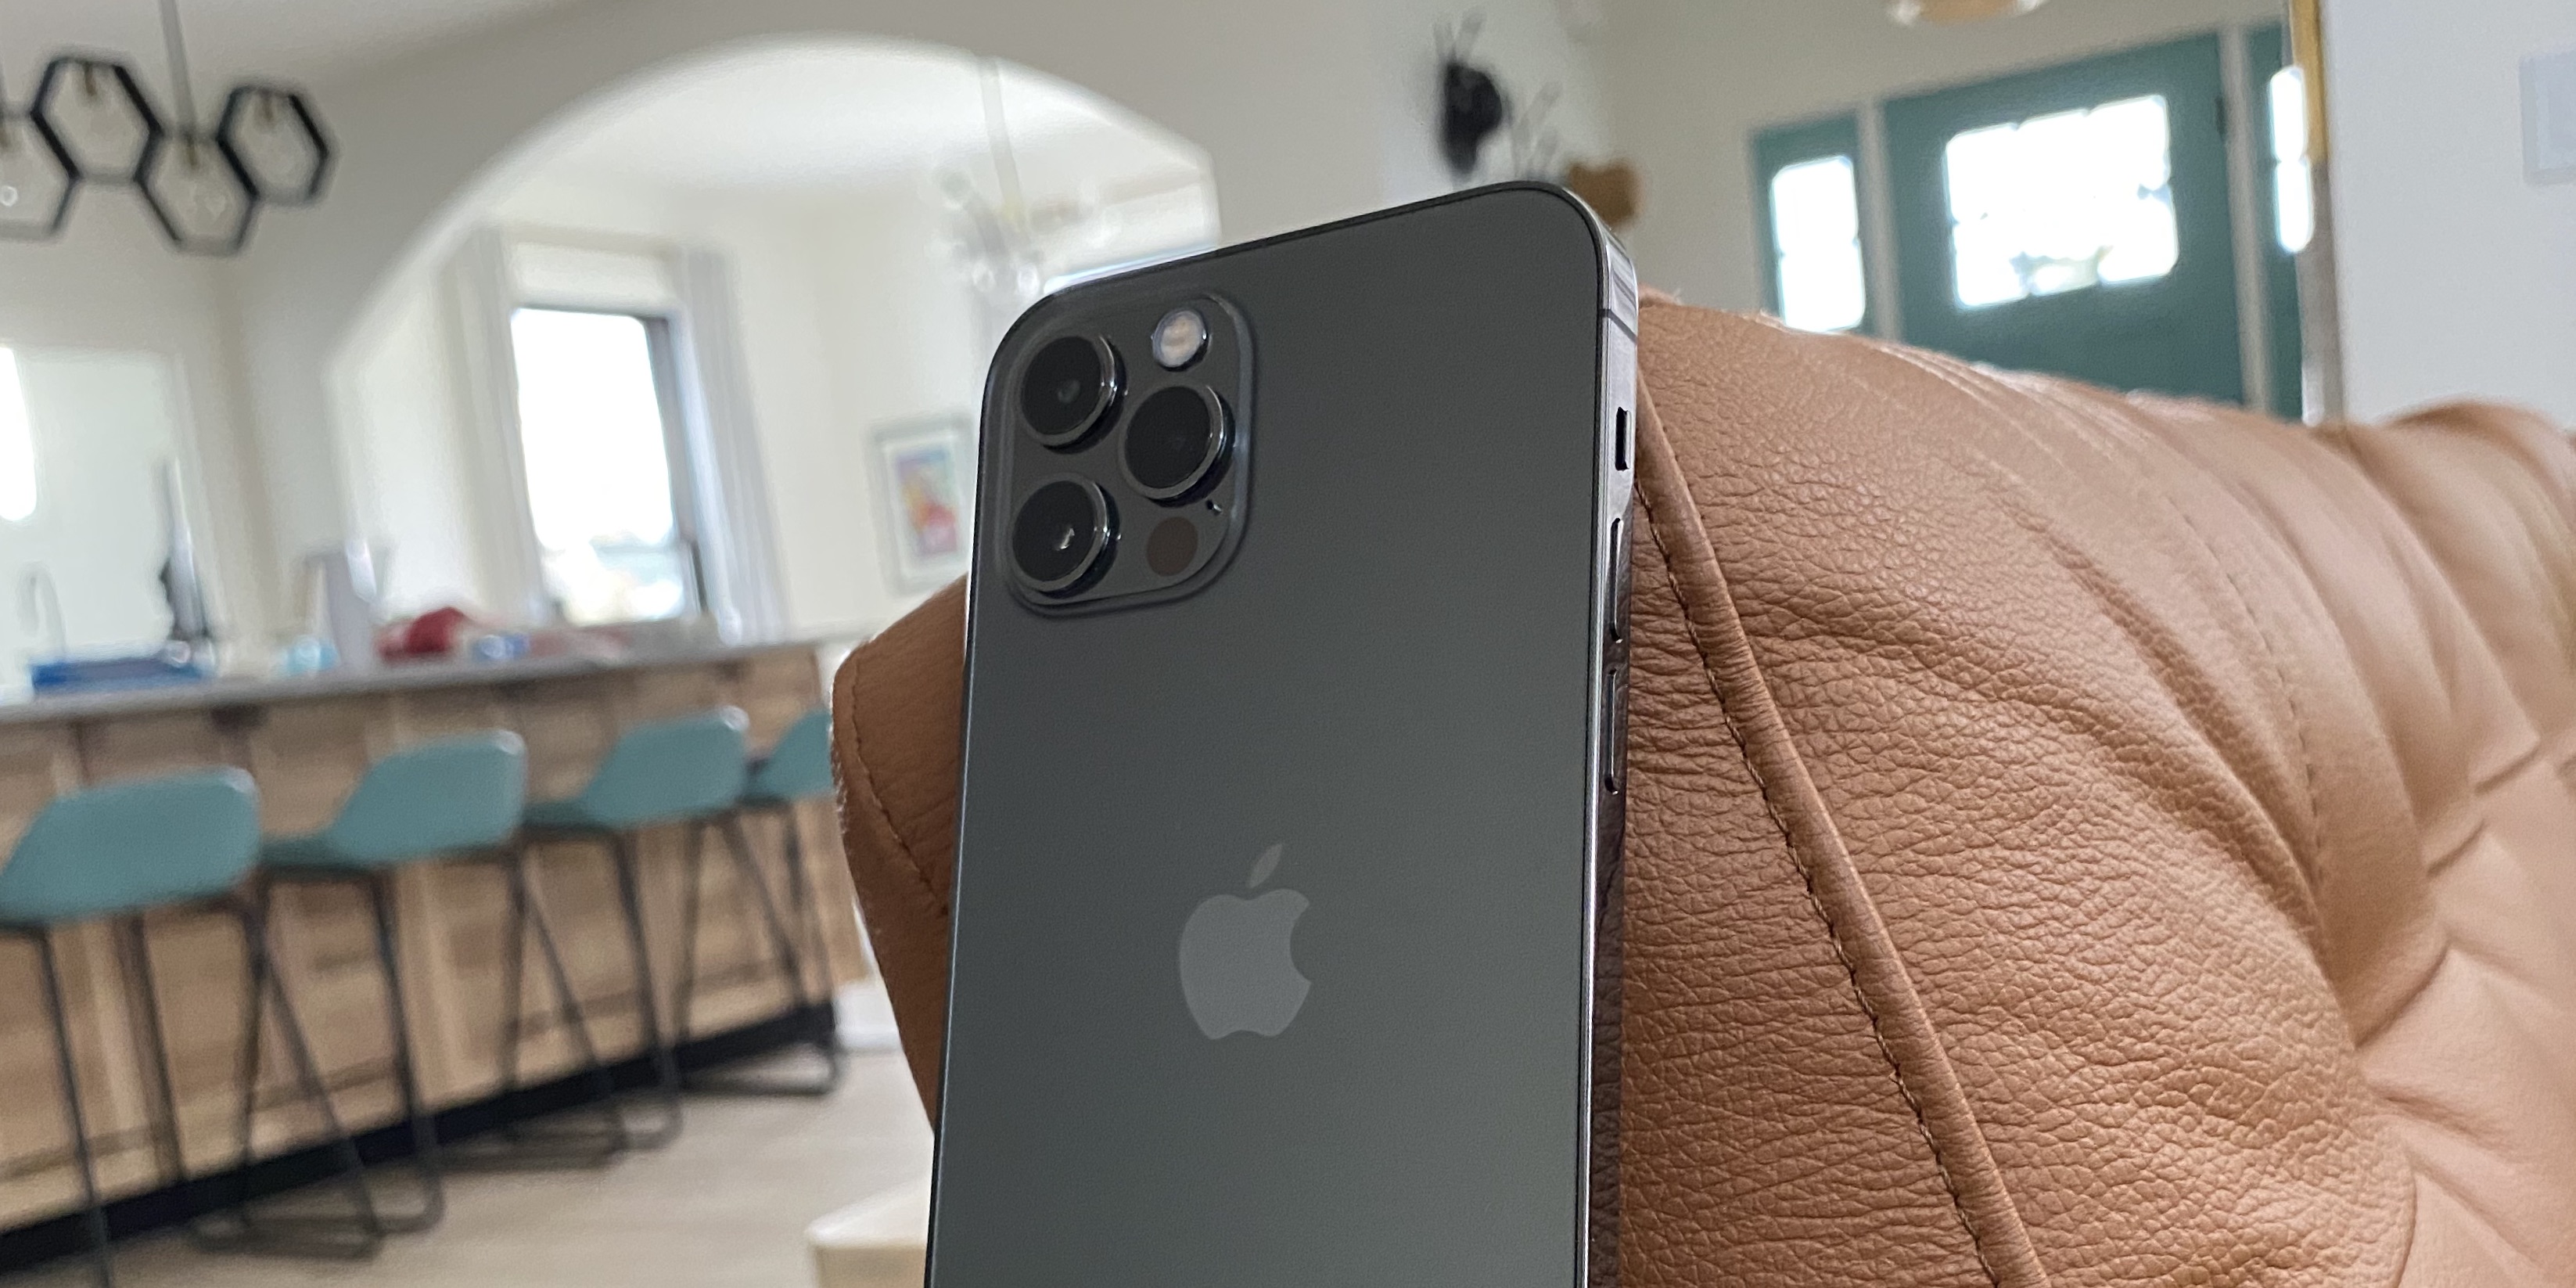 iPhone 12 Pro scores 128 in DXOMark camera test, ranked in fourth place